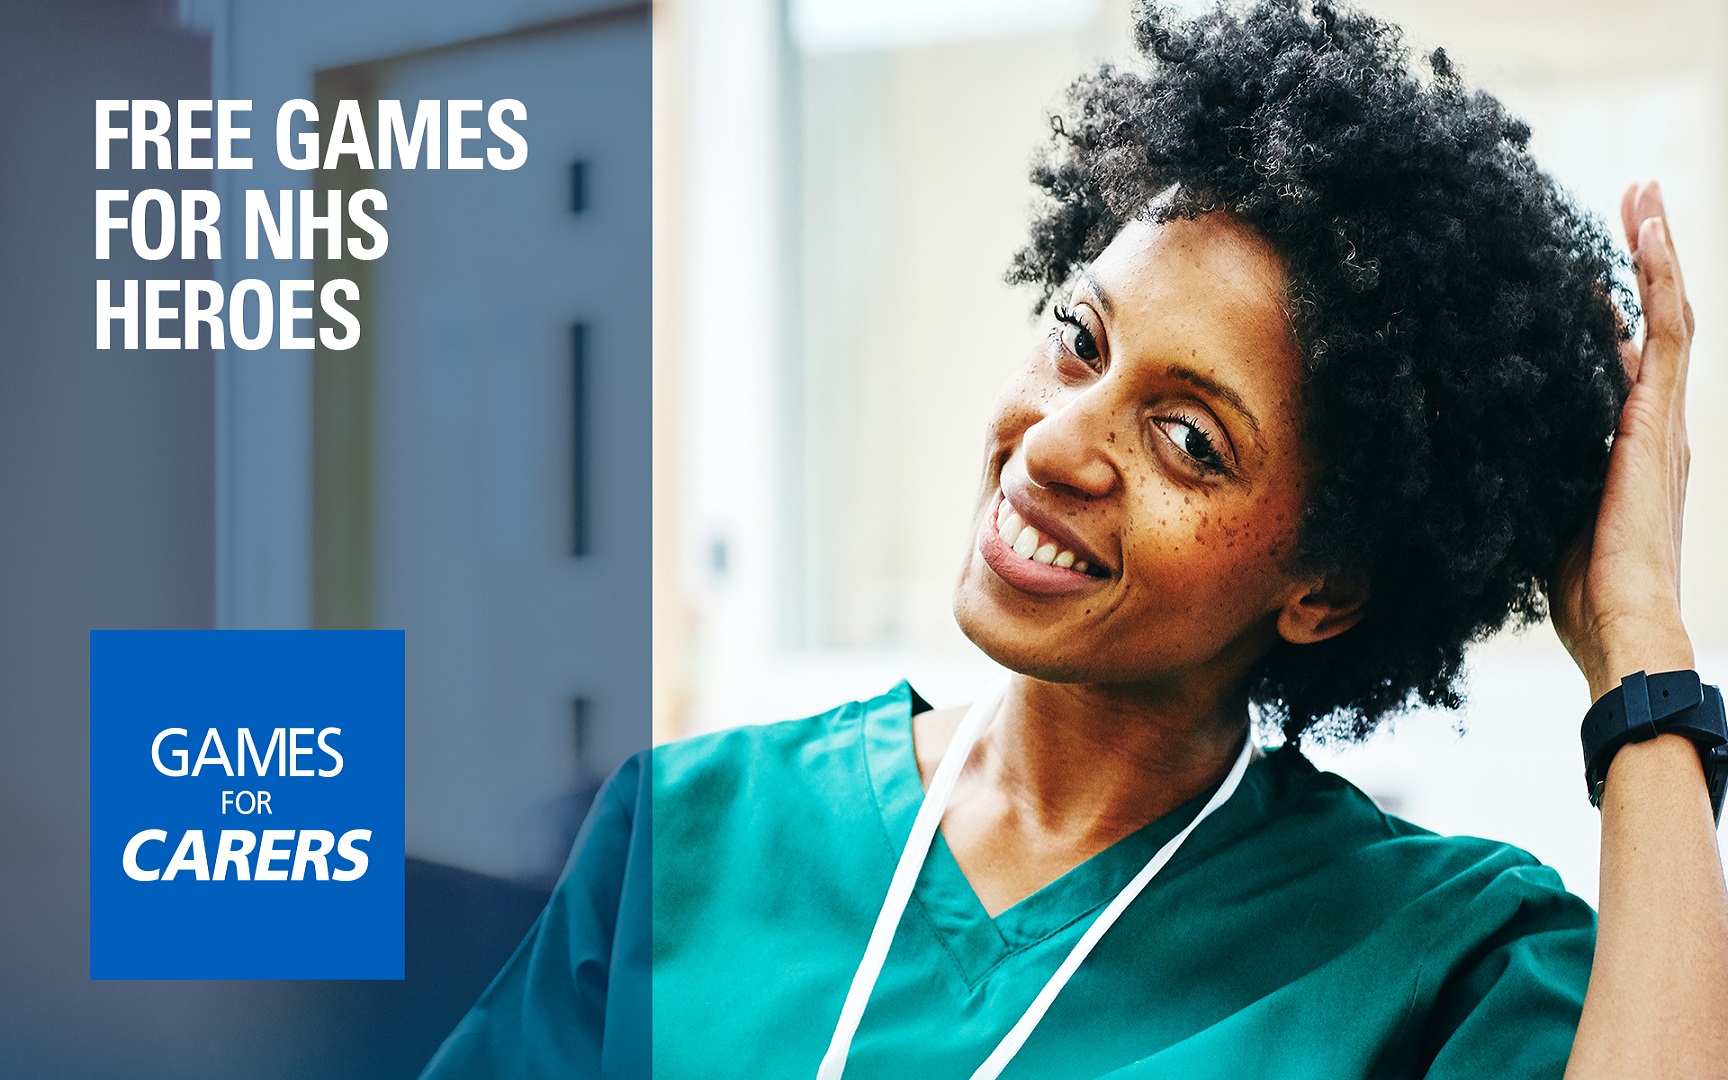 A graphic announcing the "Free Games for NHS Heroes" initiative, featuring a picture of a nurse